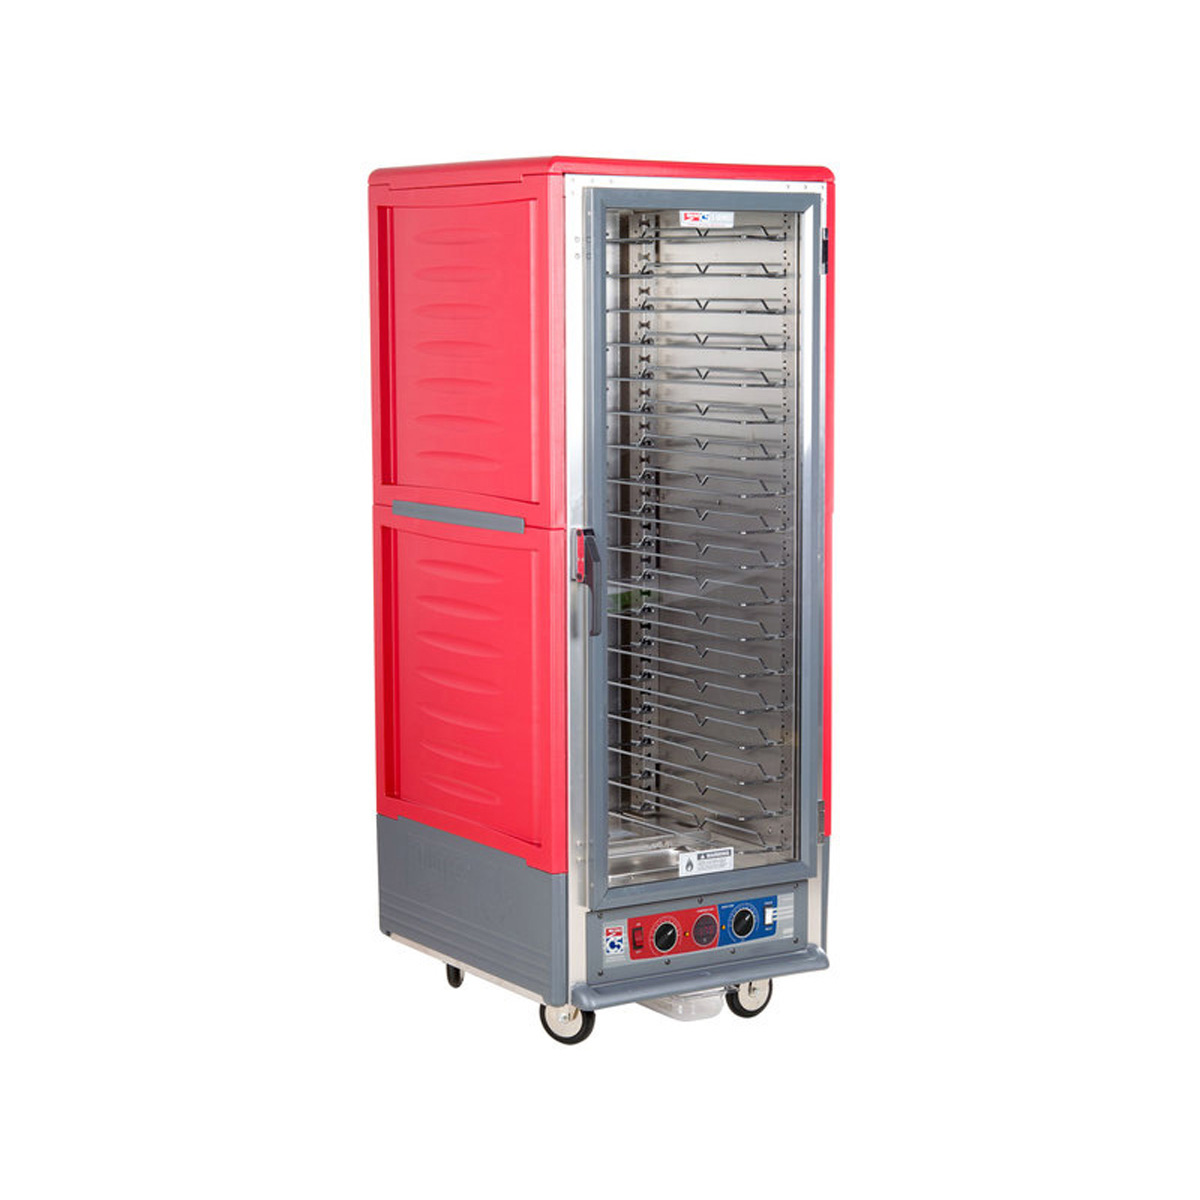 Metro C539-CFC-UA C5 3 Series Mobile Heated Proofing and Holding Cabinet